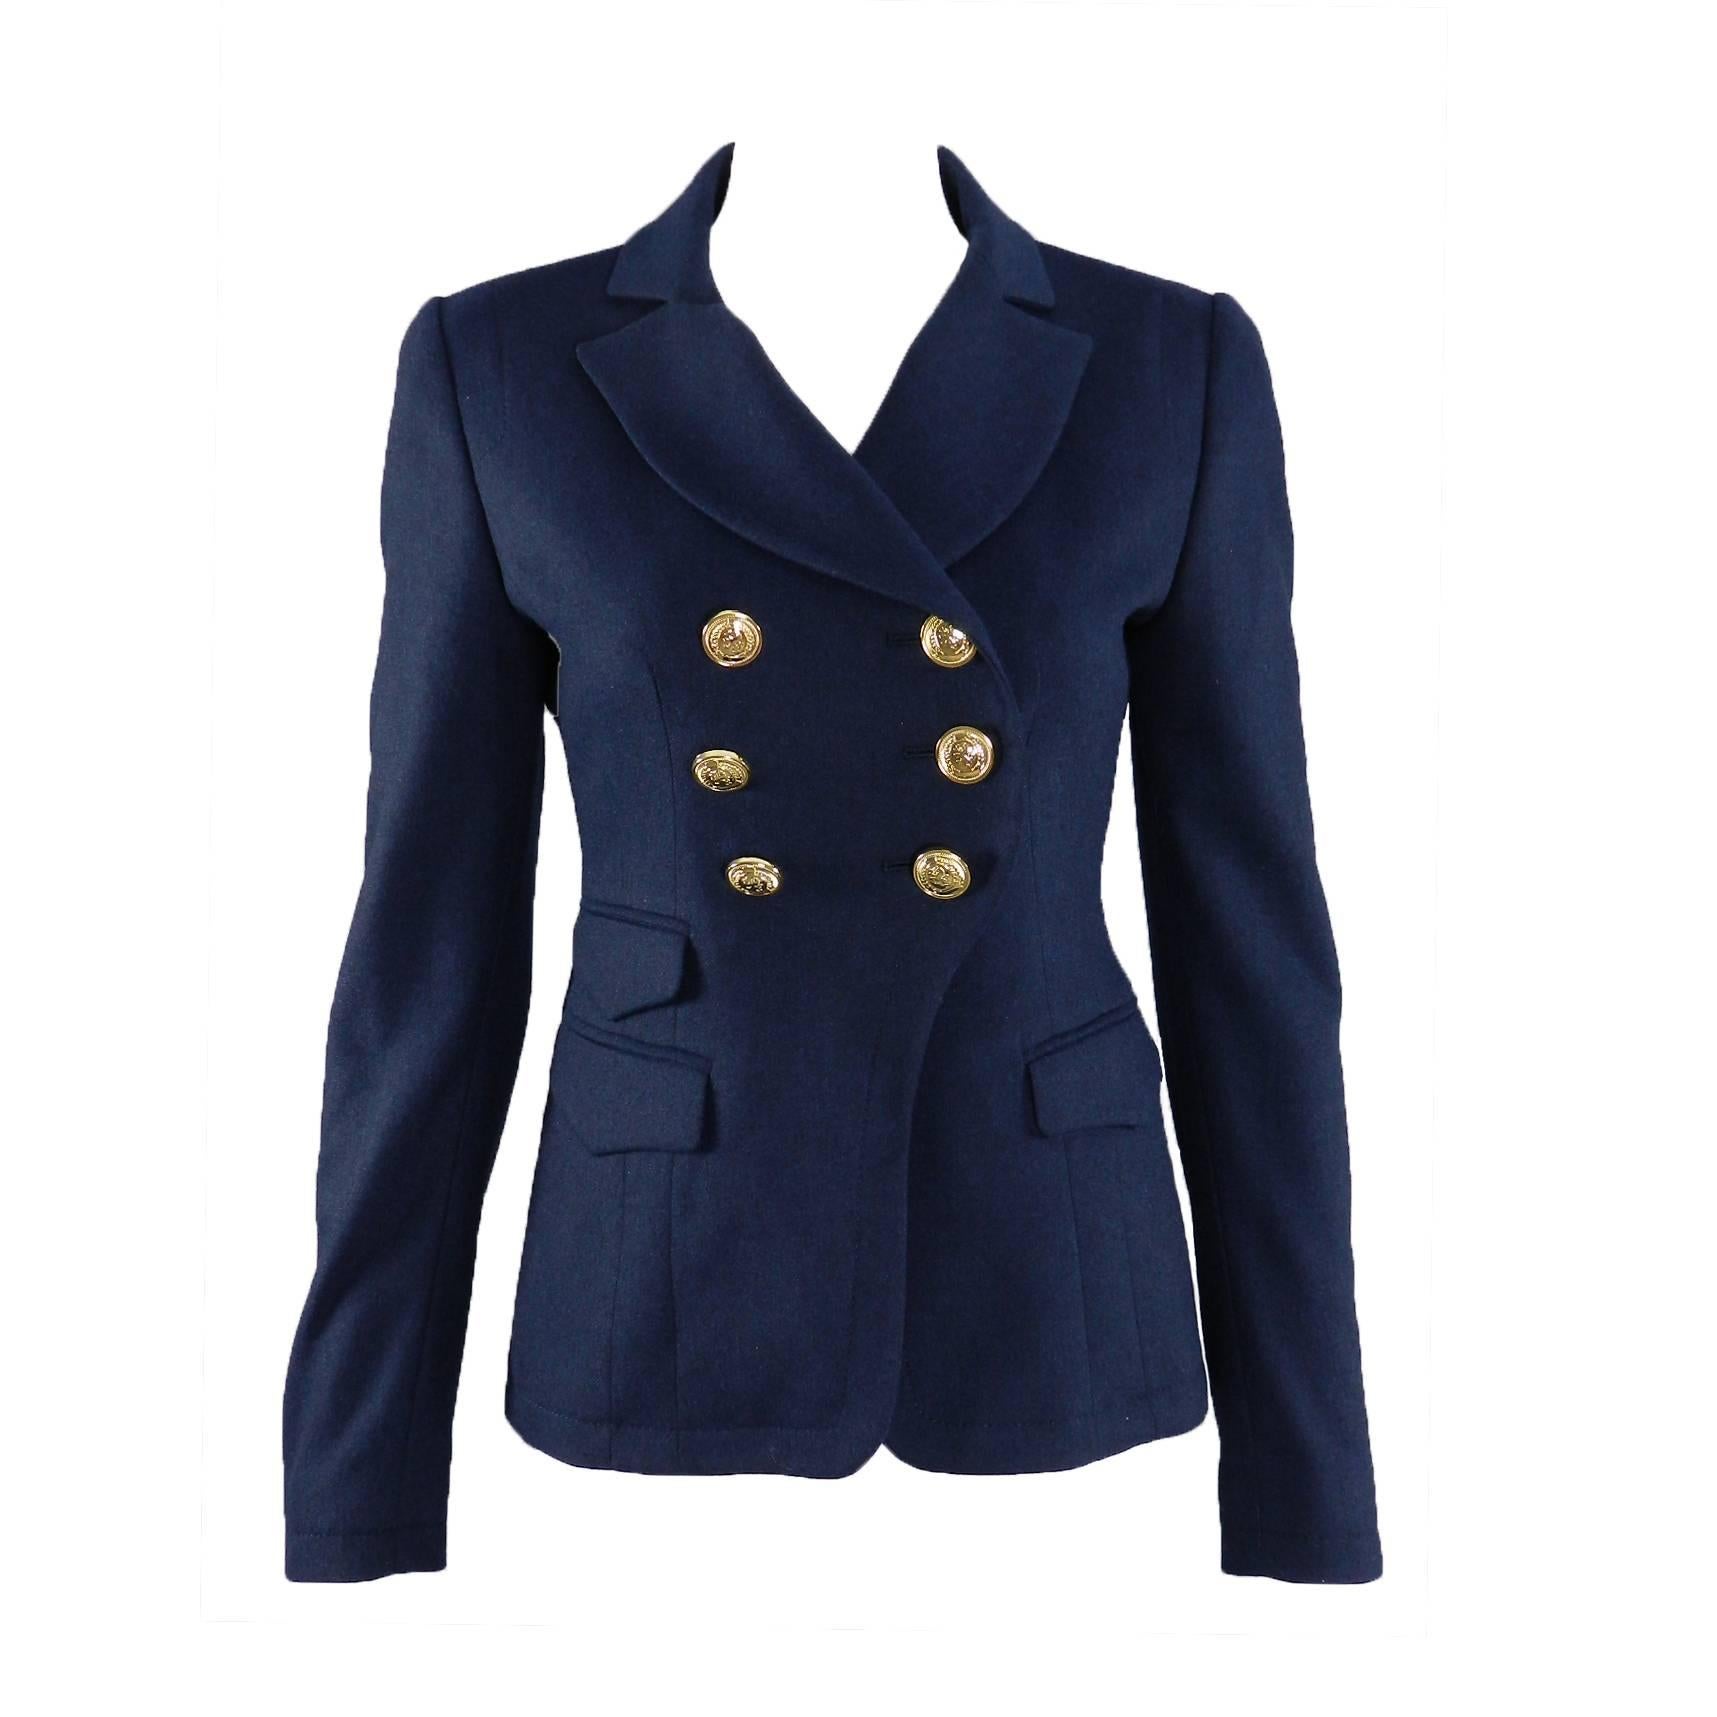 Altuzarra Navy Military Runway Jacket with Gold Buttons